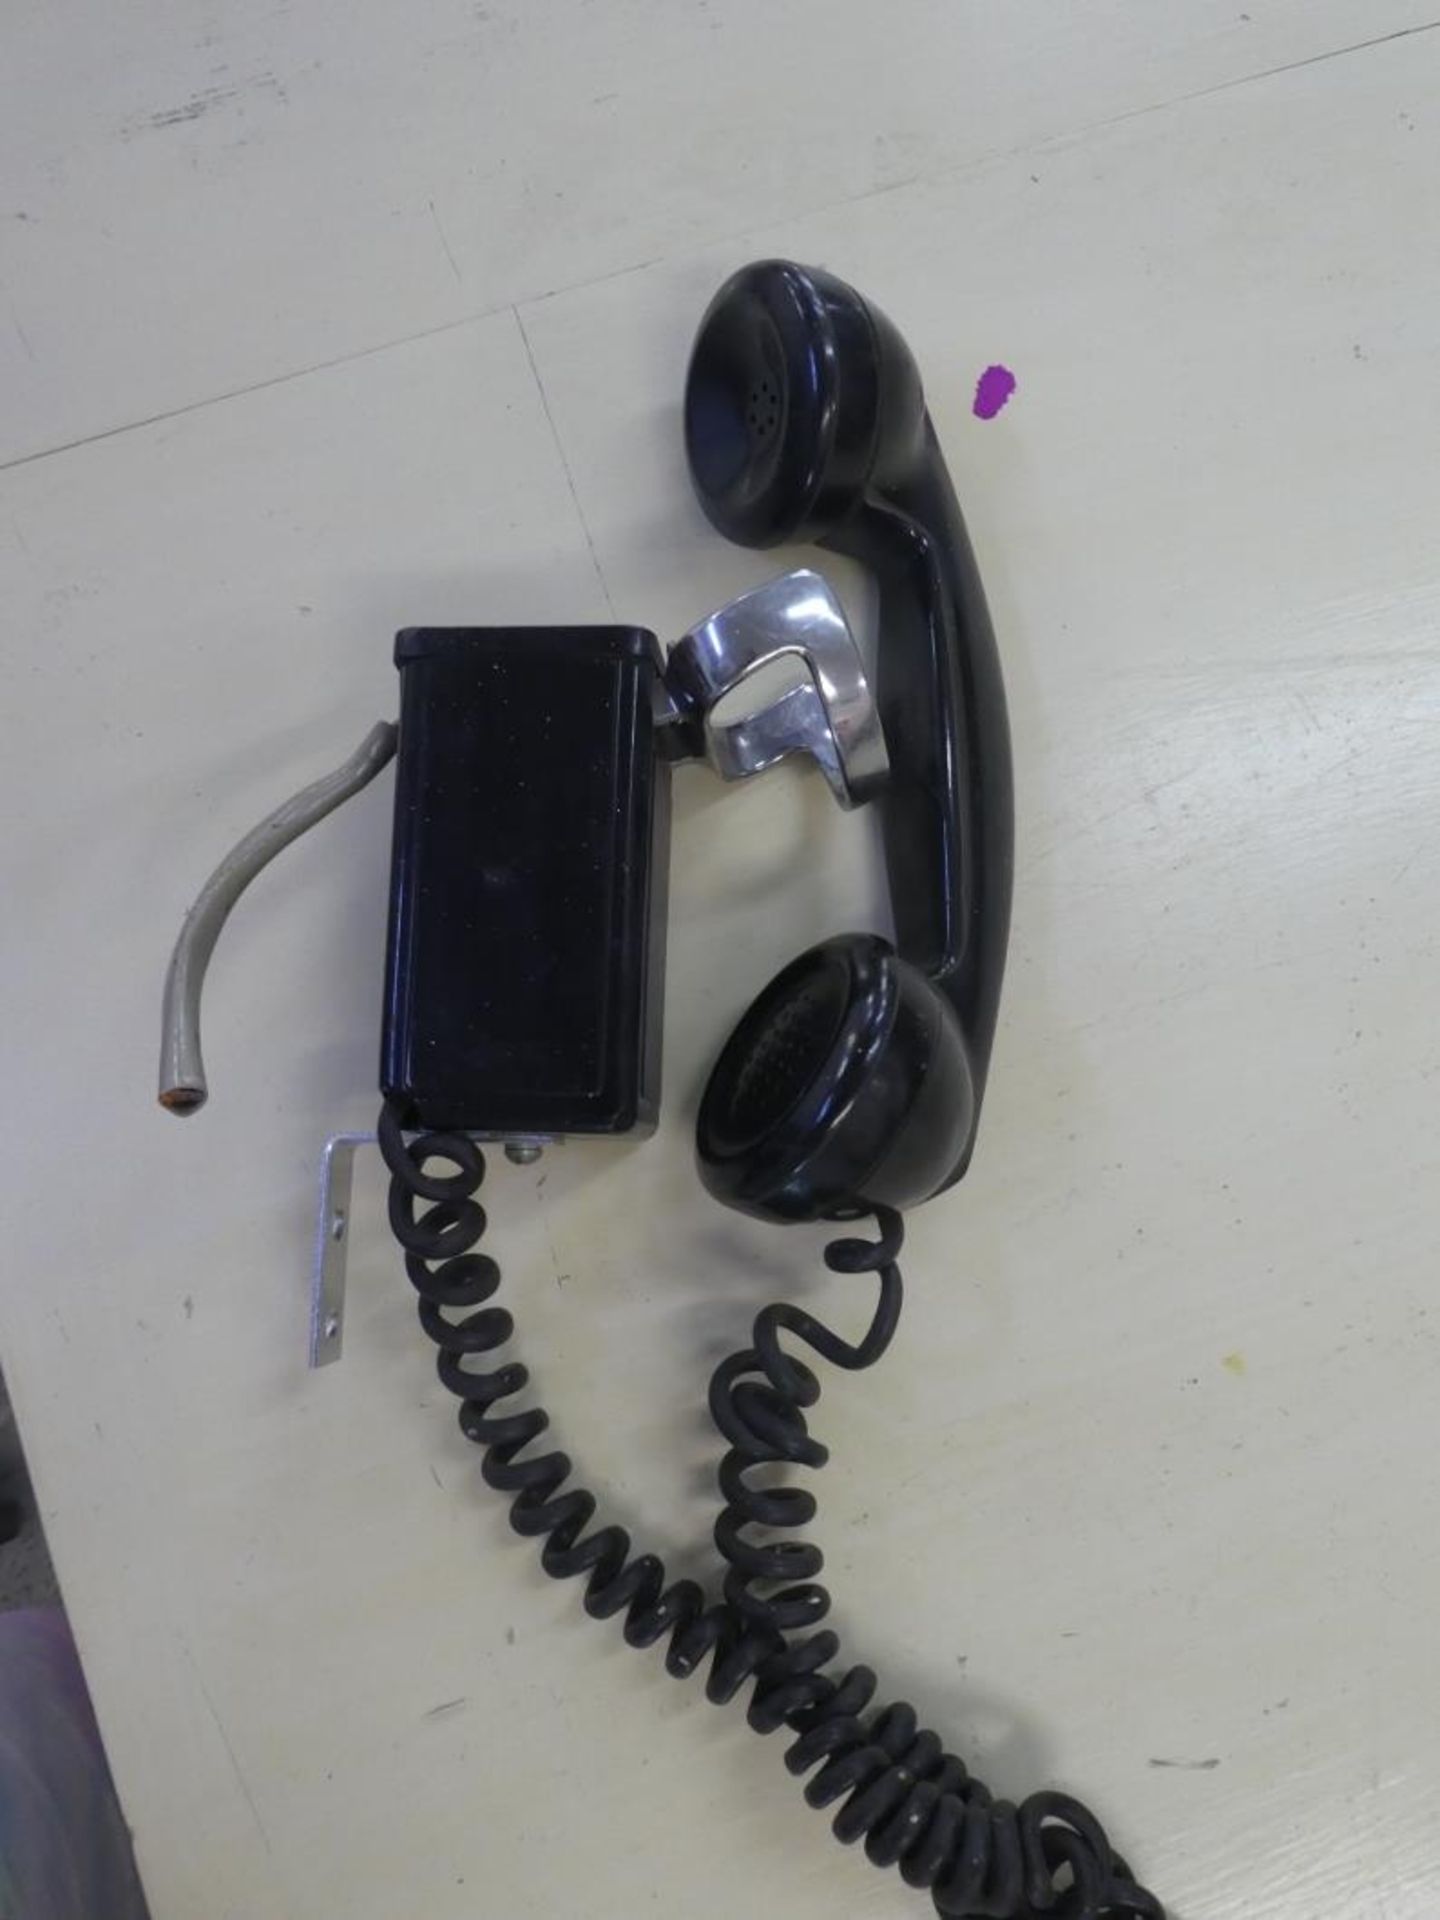 VINTAGE TELEPHONE RECEIVER - Image 2 of 2